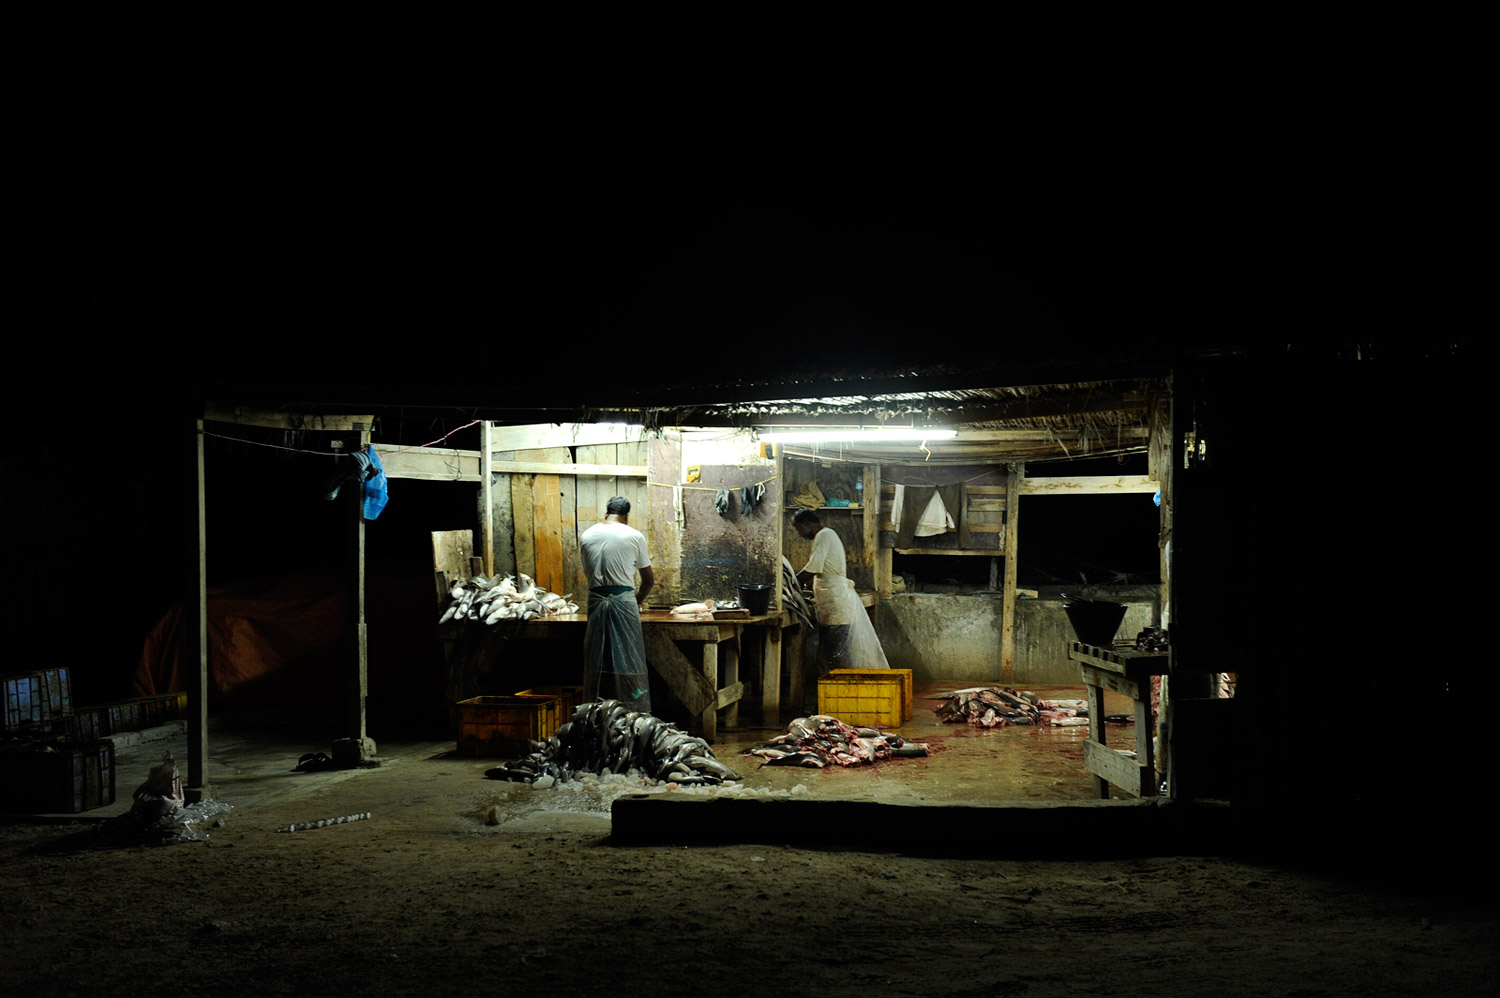 At a compound situated at the edge of the Arabian Sea, workers process sharks after sunset.